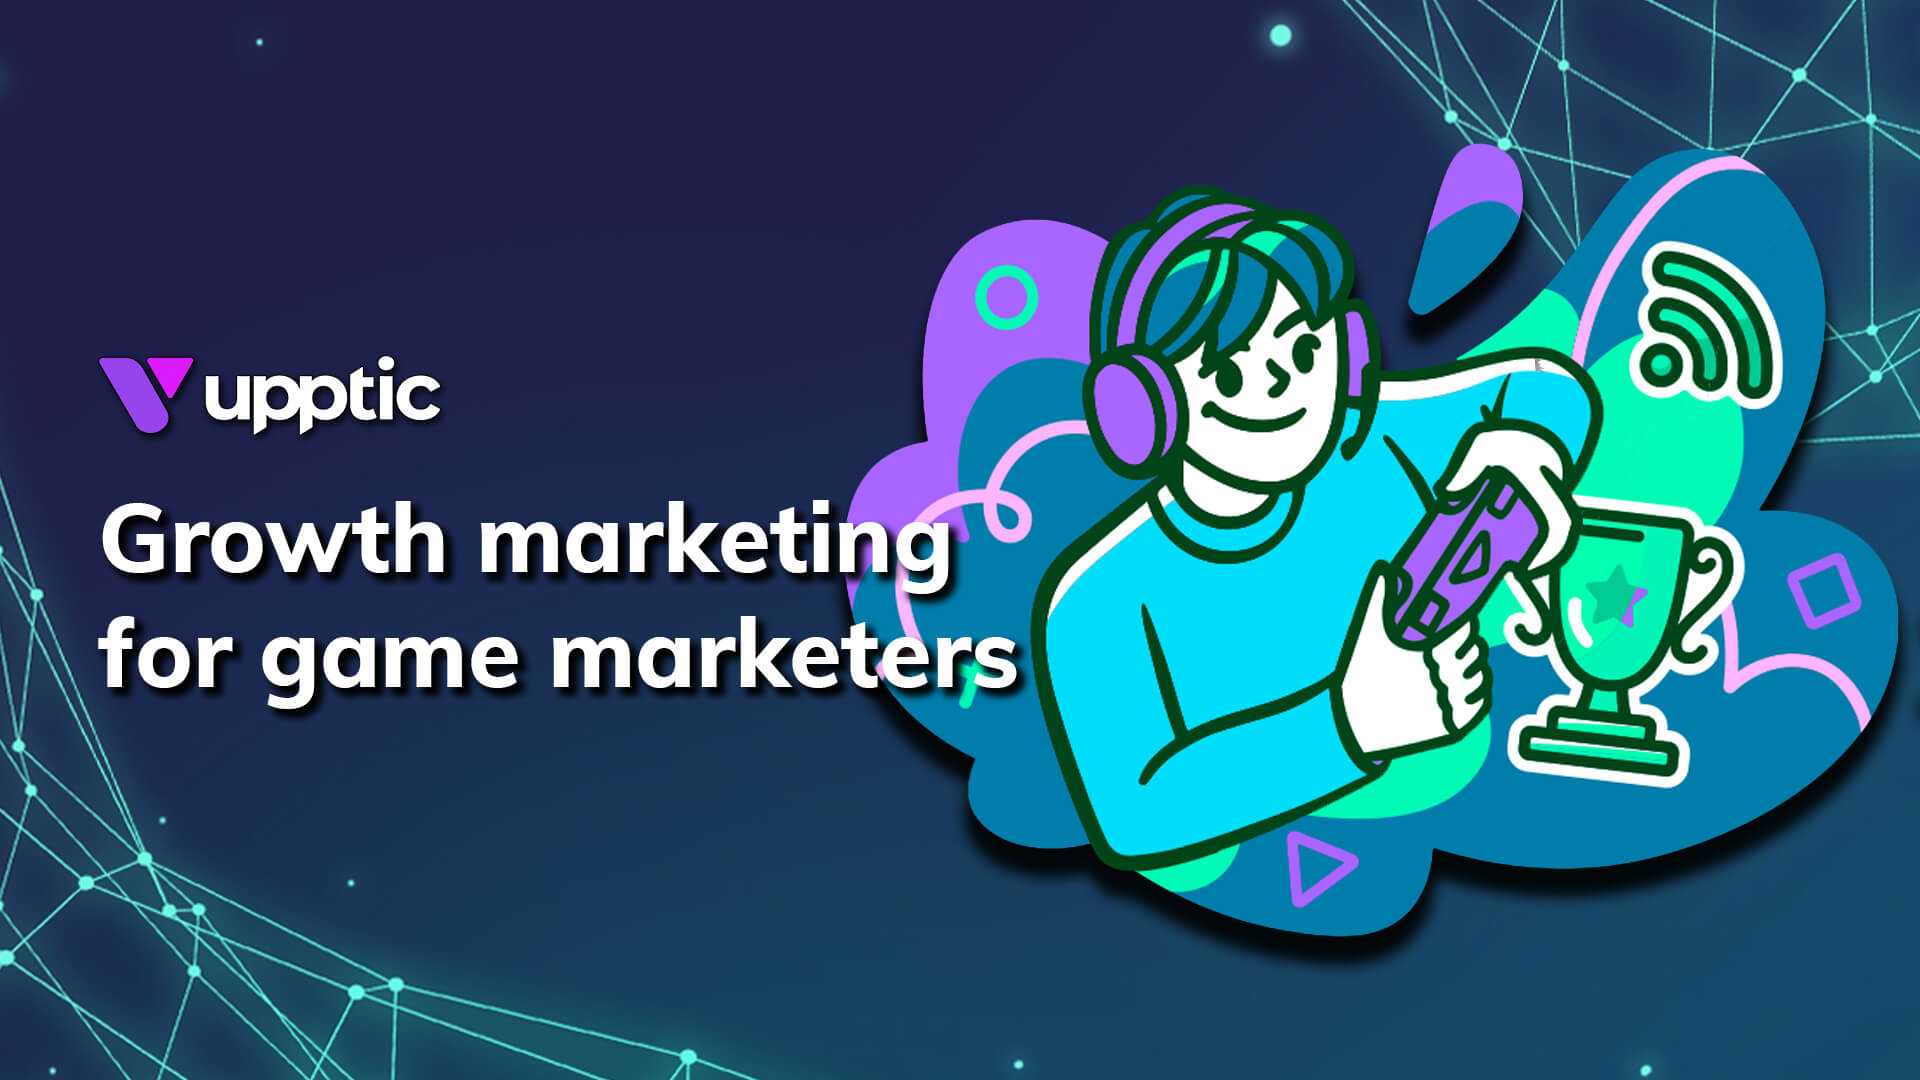 Upptic's guide to growth marketing for game marketers